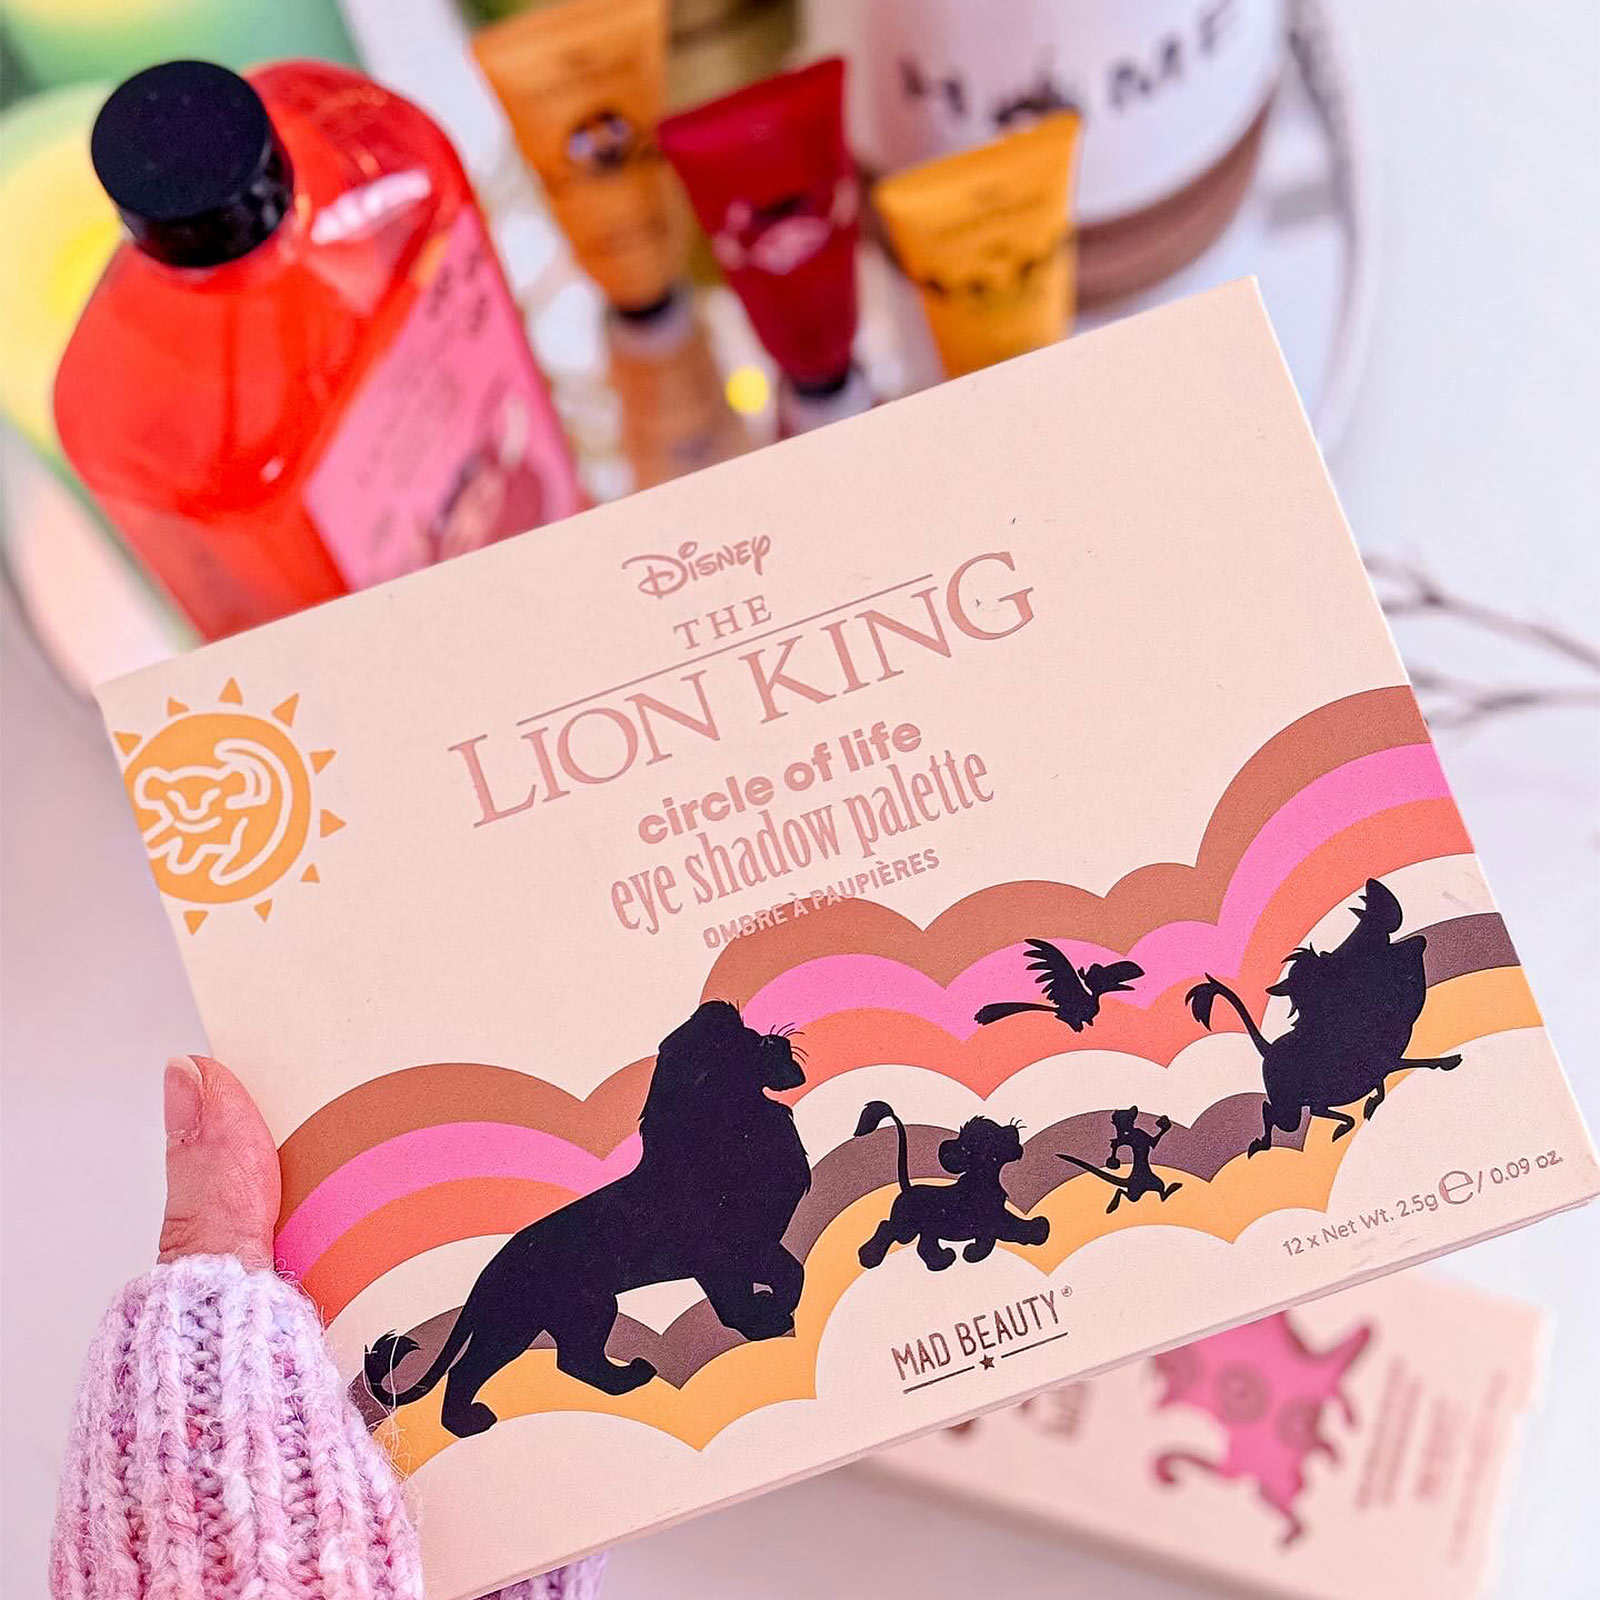 The Lion King - Circle of Life Eyeshadow Palette